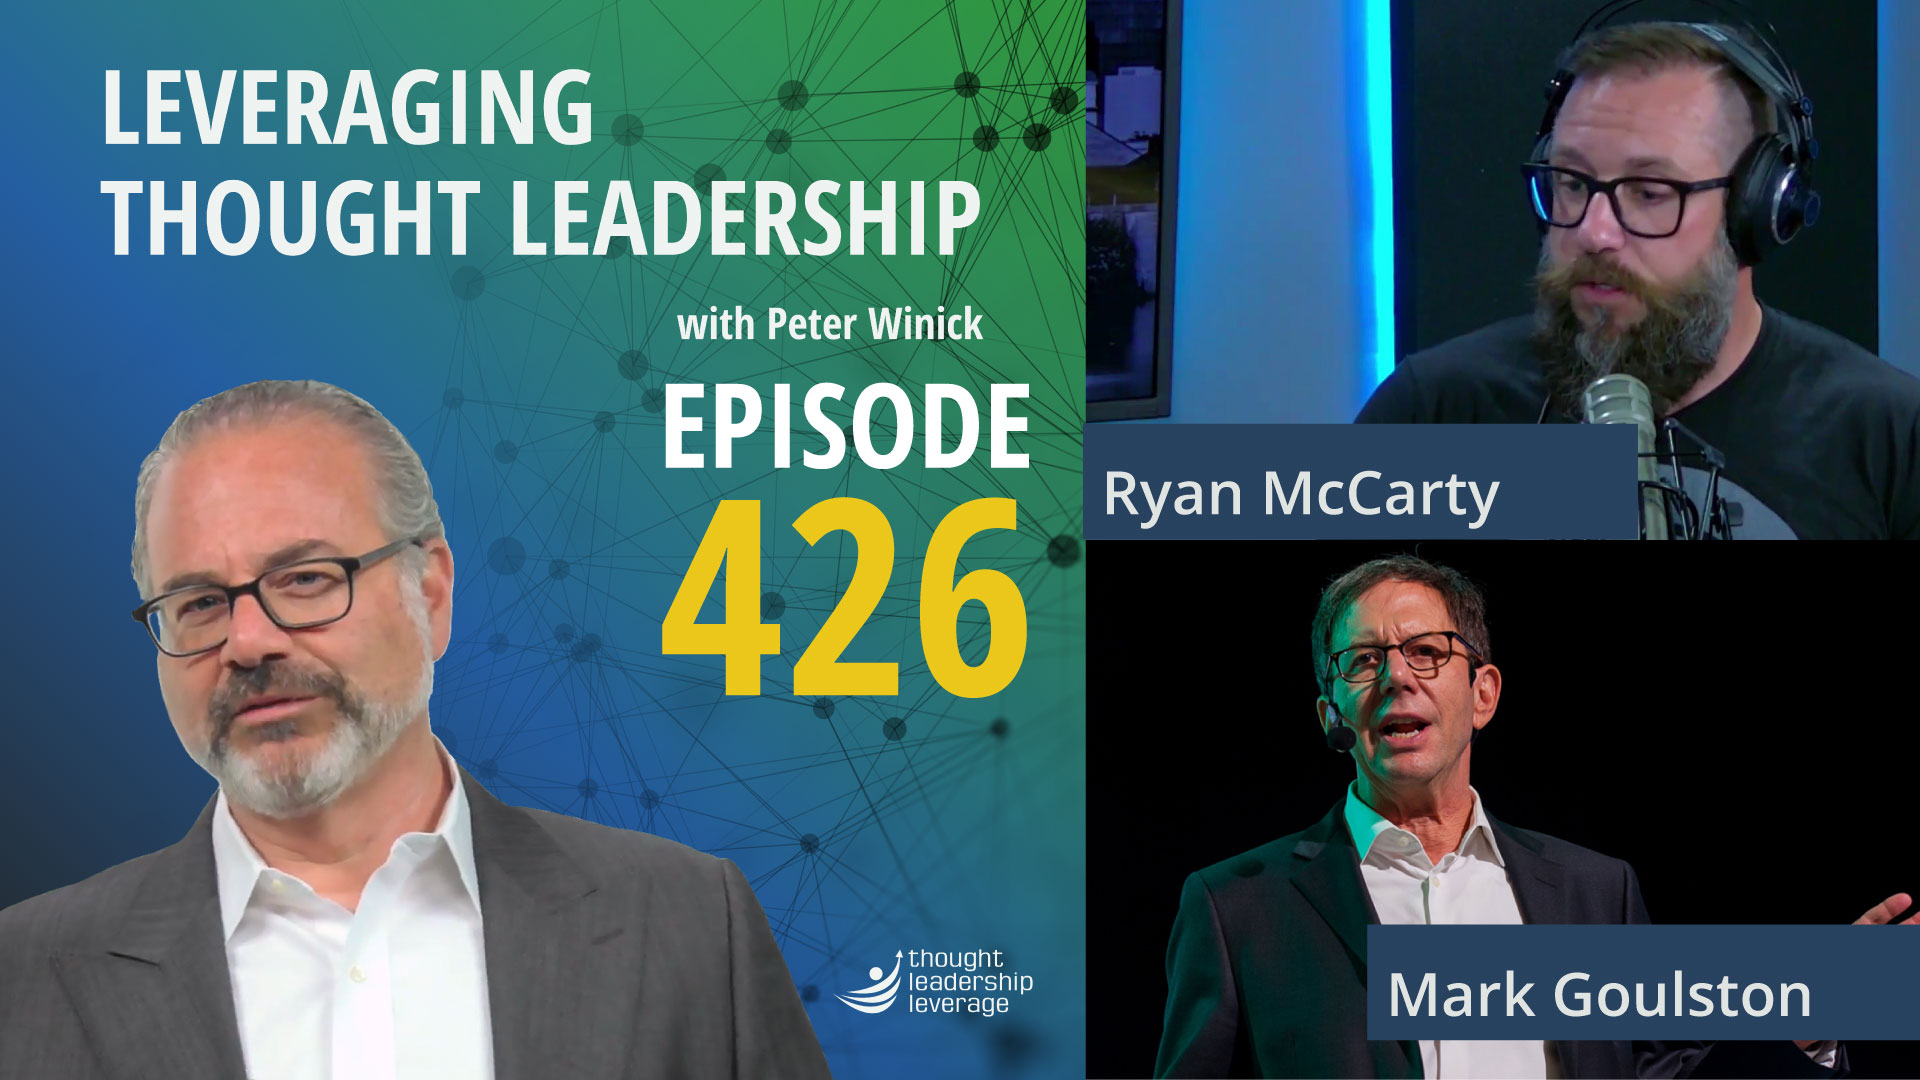 Thought Leadership for Serving Others | Ryan McCarty & Mark Goulston